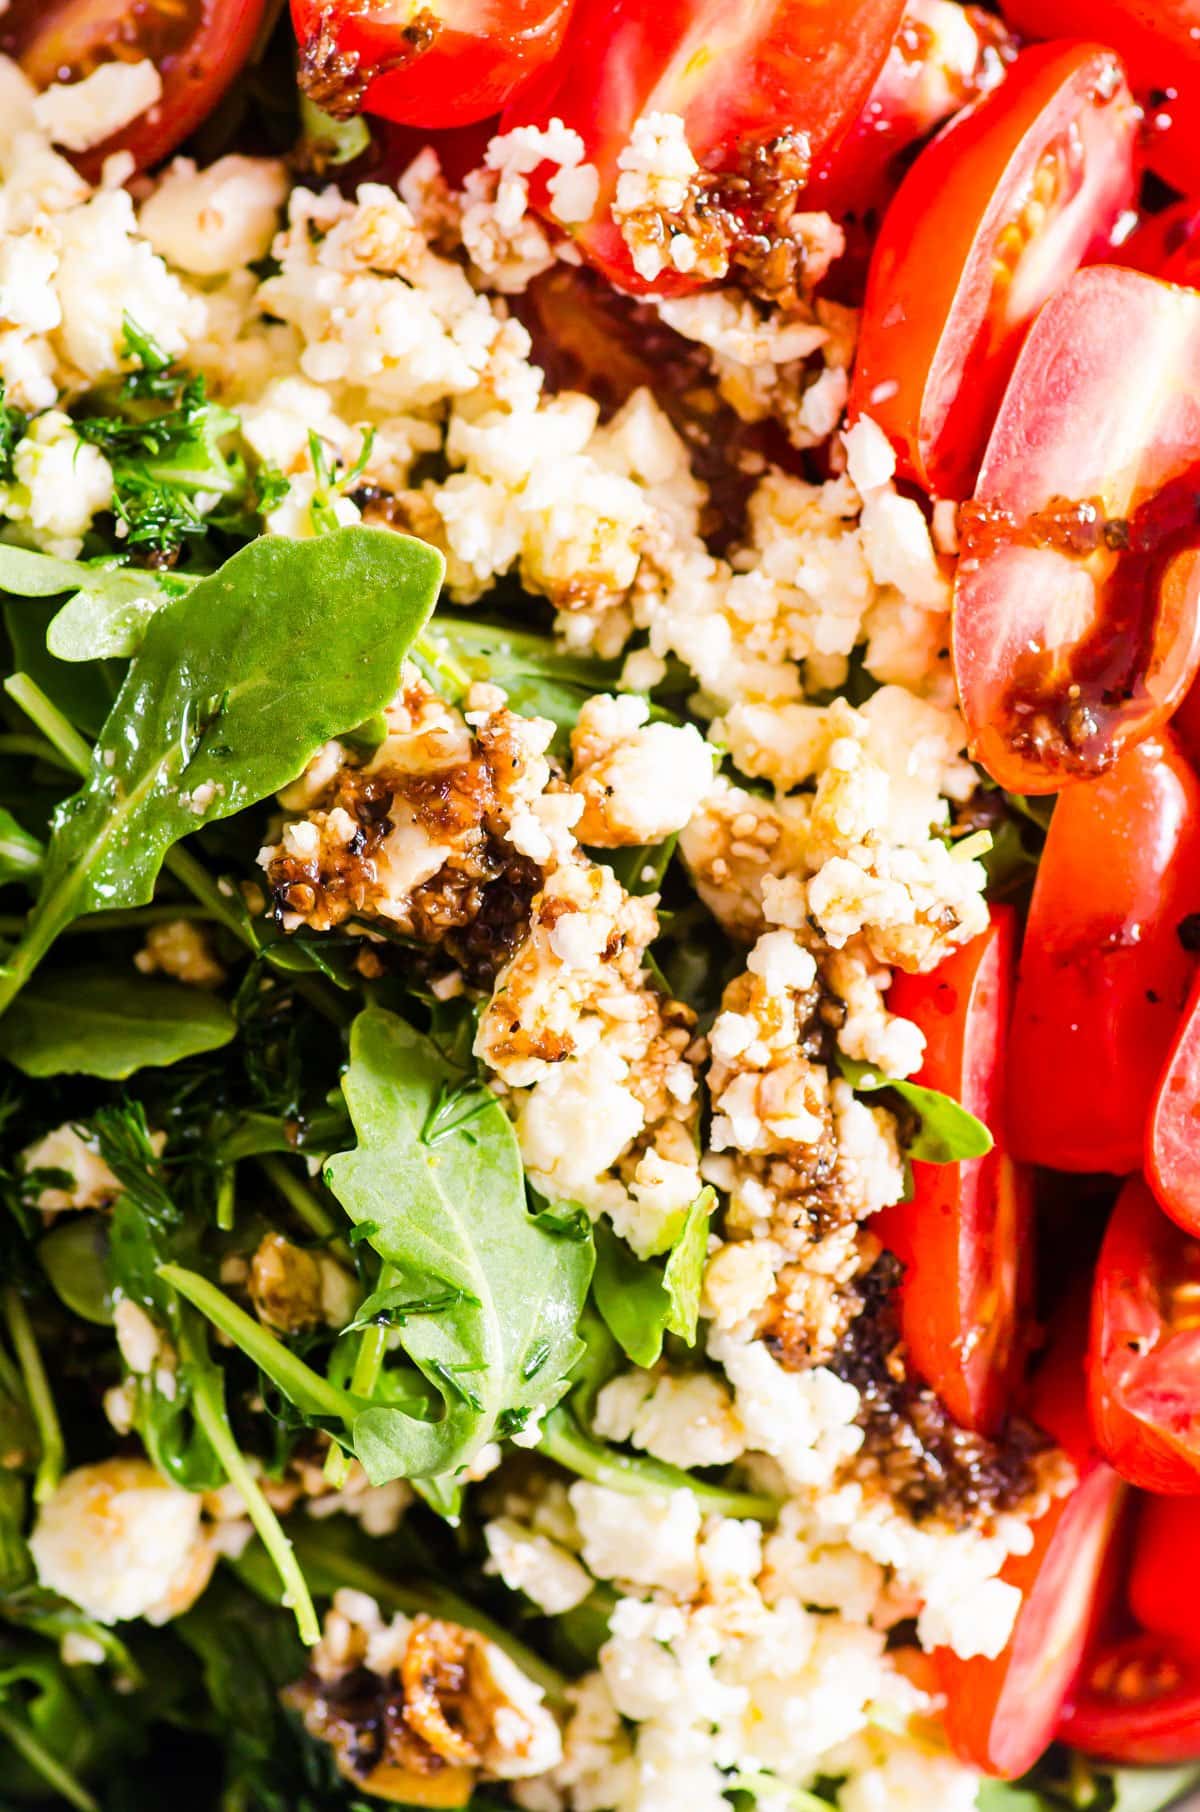 Close up of arugula feta salad with tomatoes and balsamic vinaigrette drizzled on top.